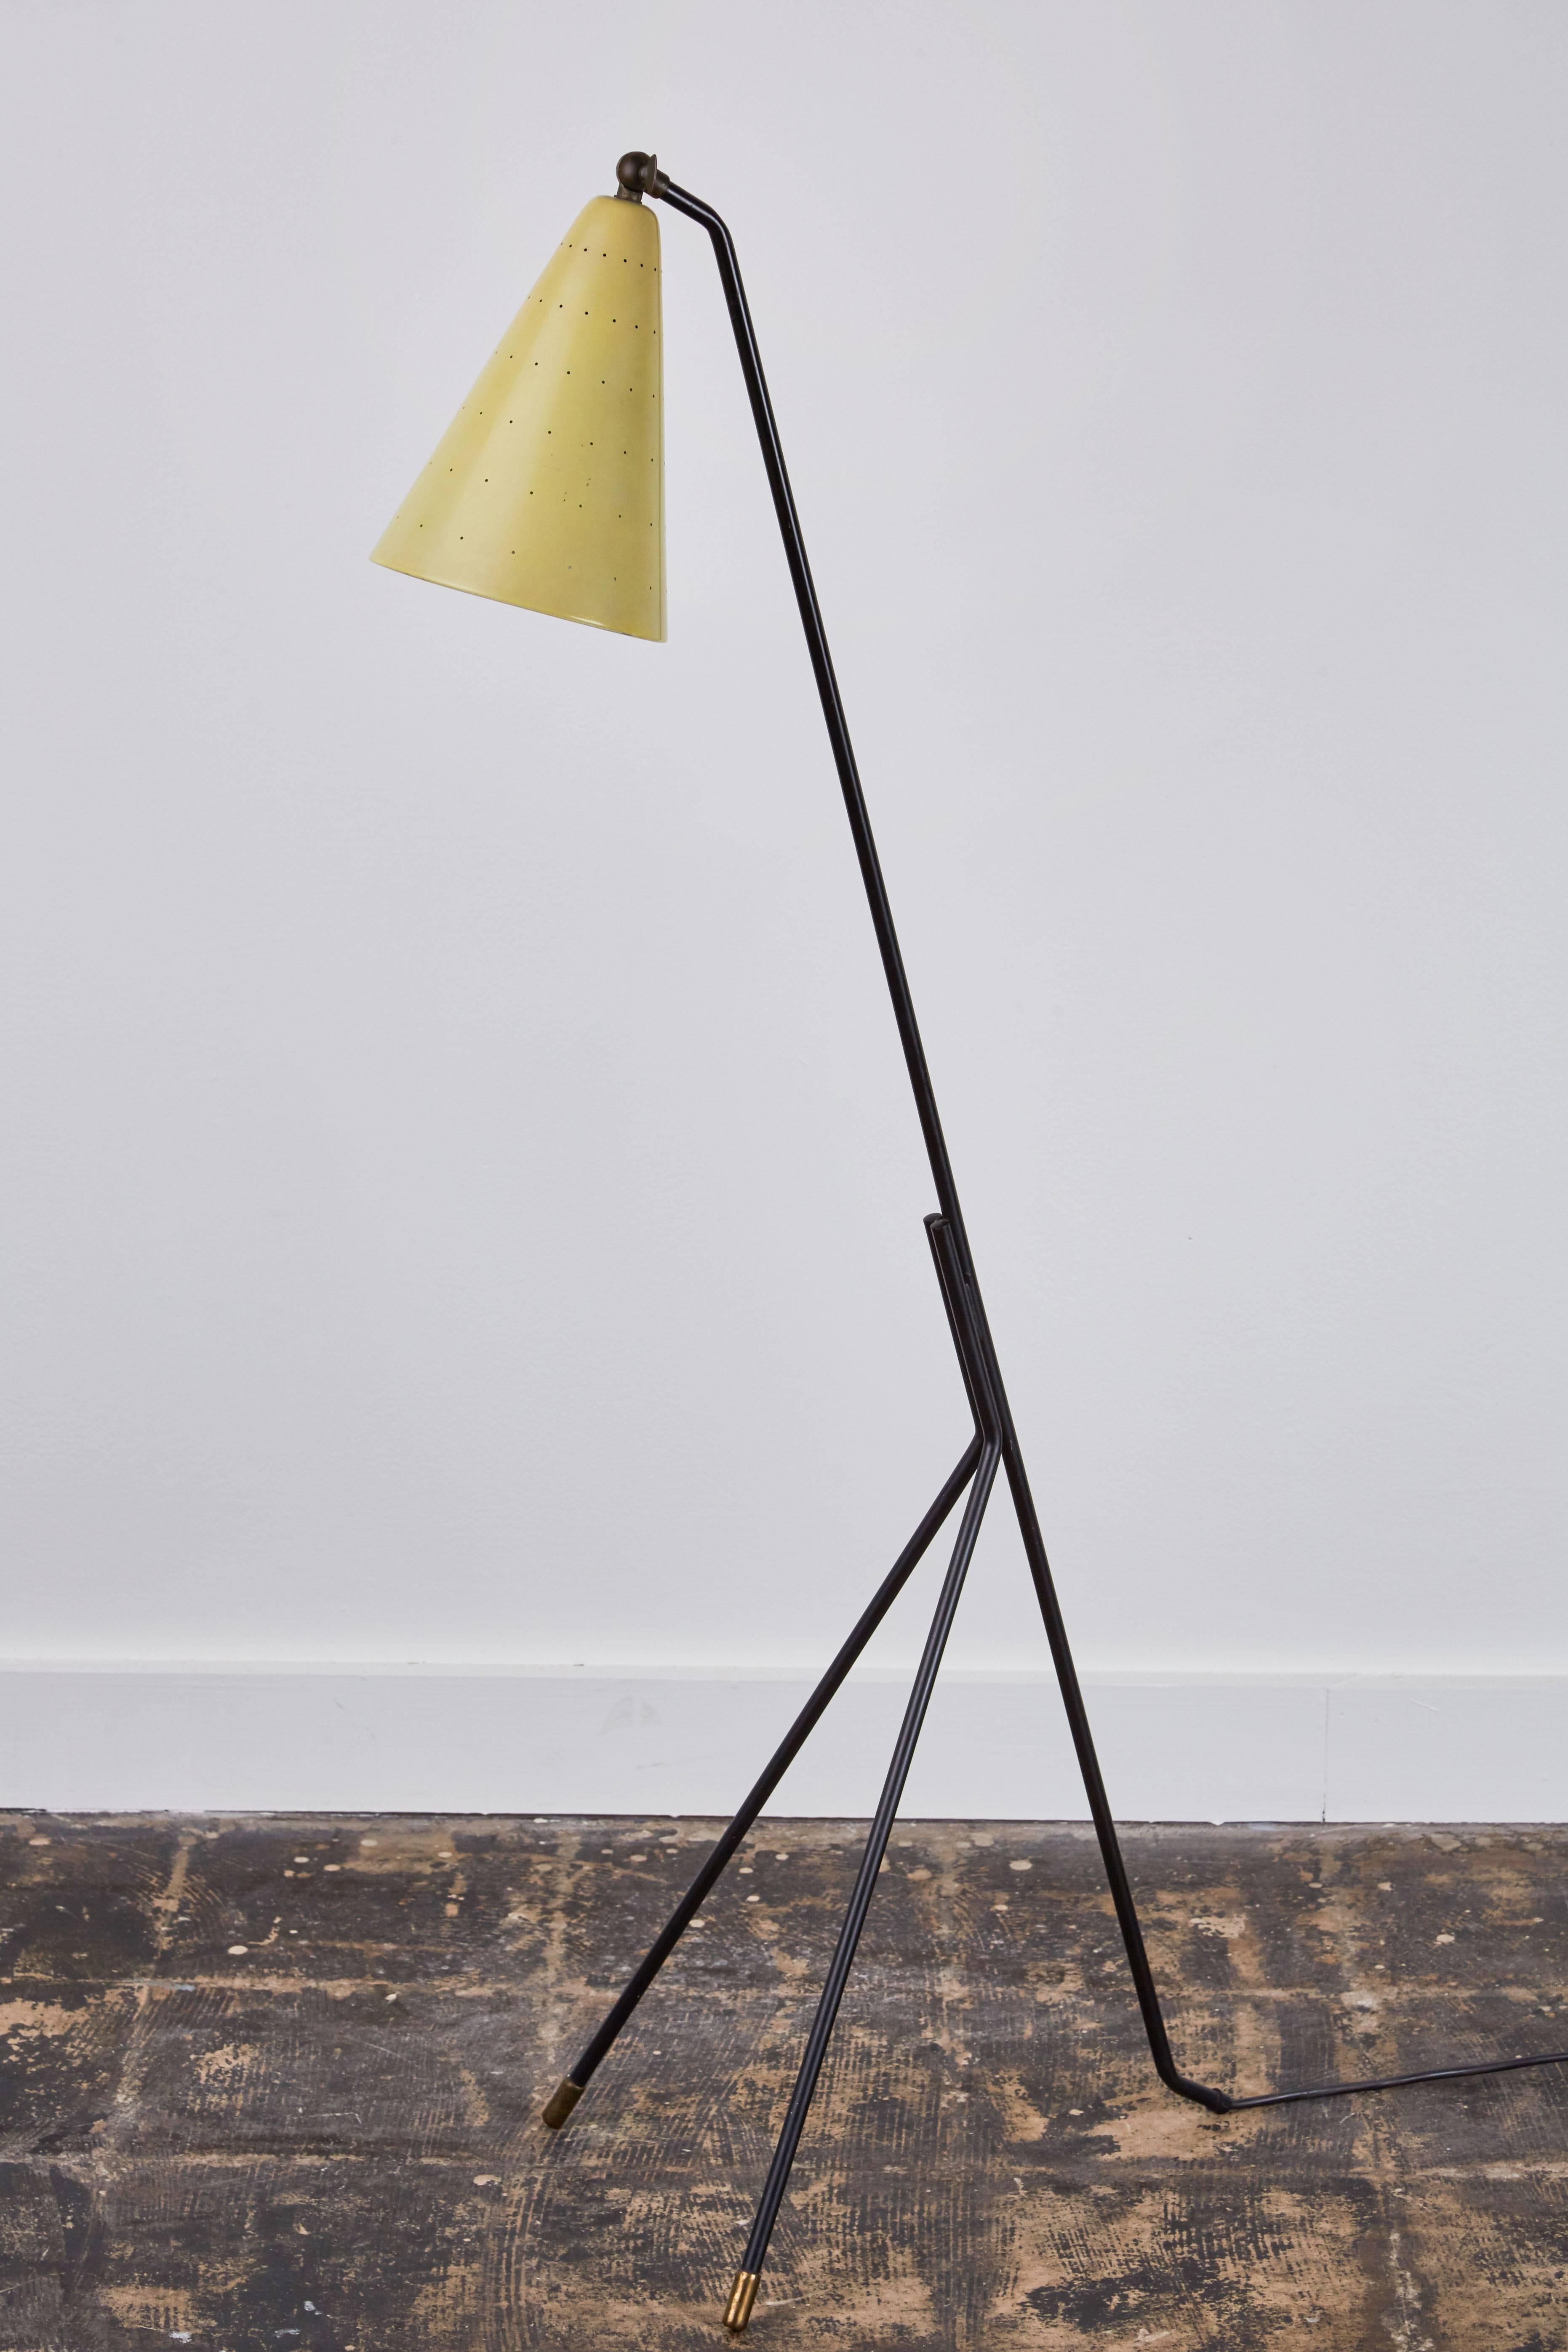 Floor lamp designed by Svend Aage Holm Sorensen. Designed in Copenhagen, circa 1950s. Black lacquered tripod base, front legs with brass leg ends, original lacquered shade mounted with switch, shade decorated with small perforations. Original cord.